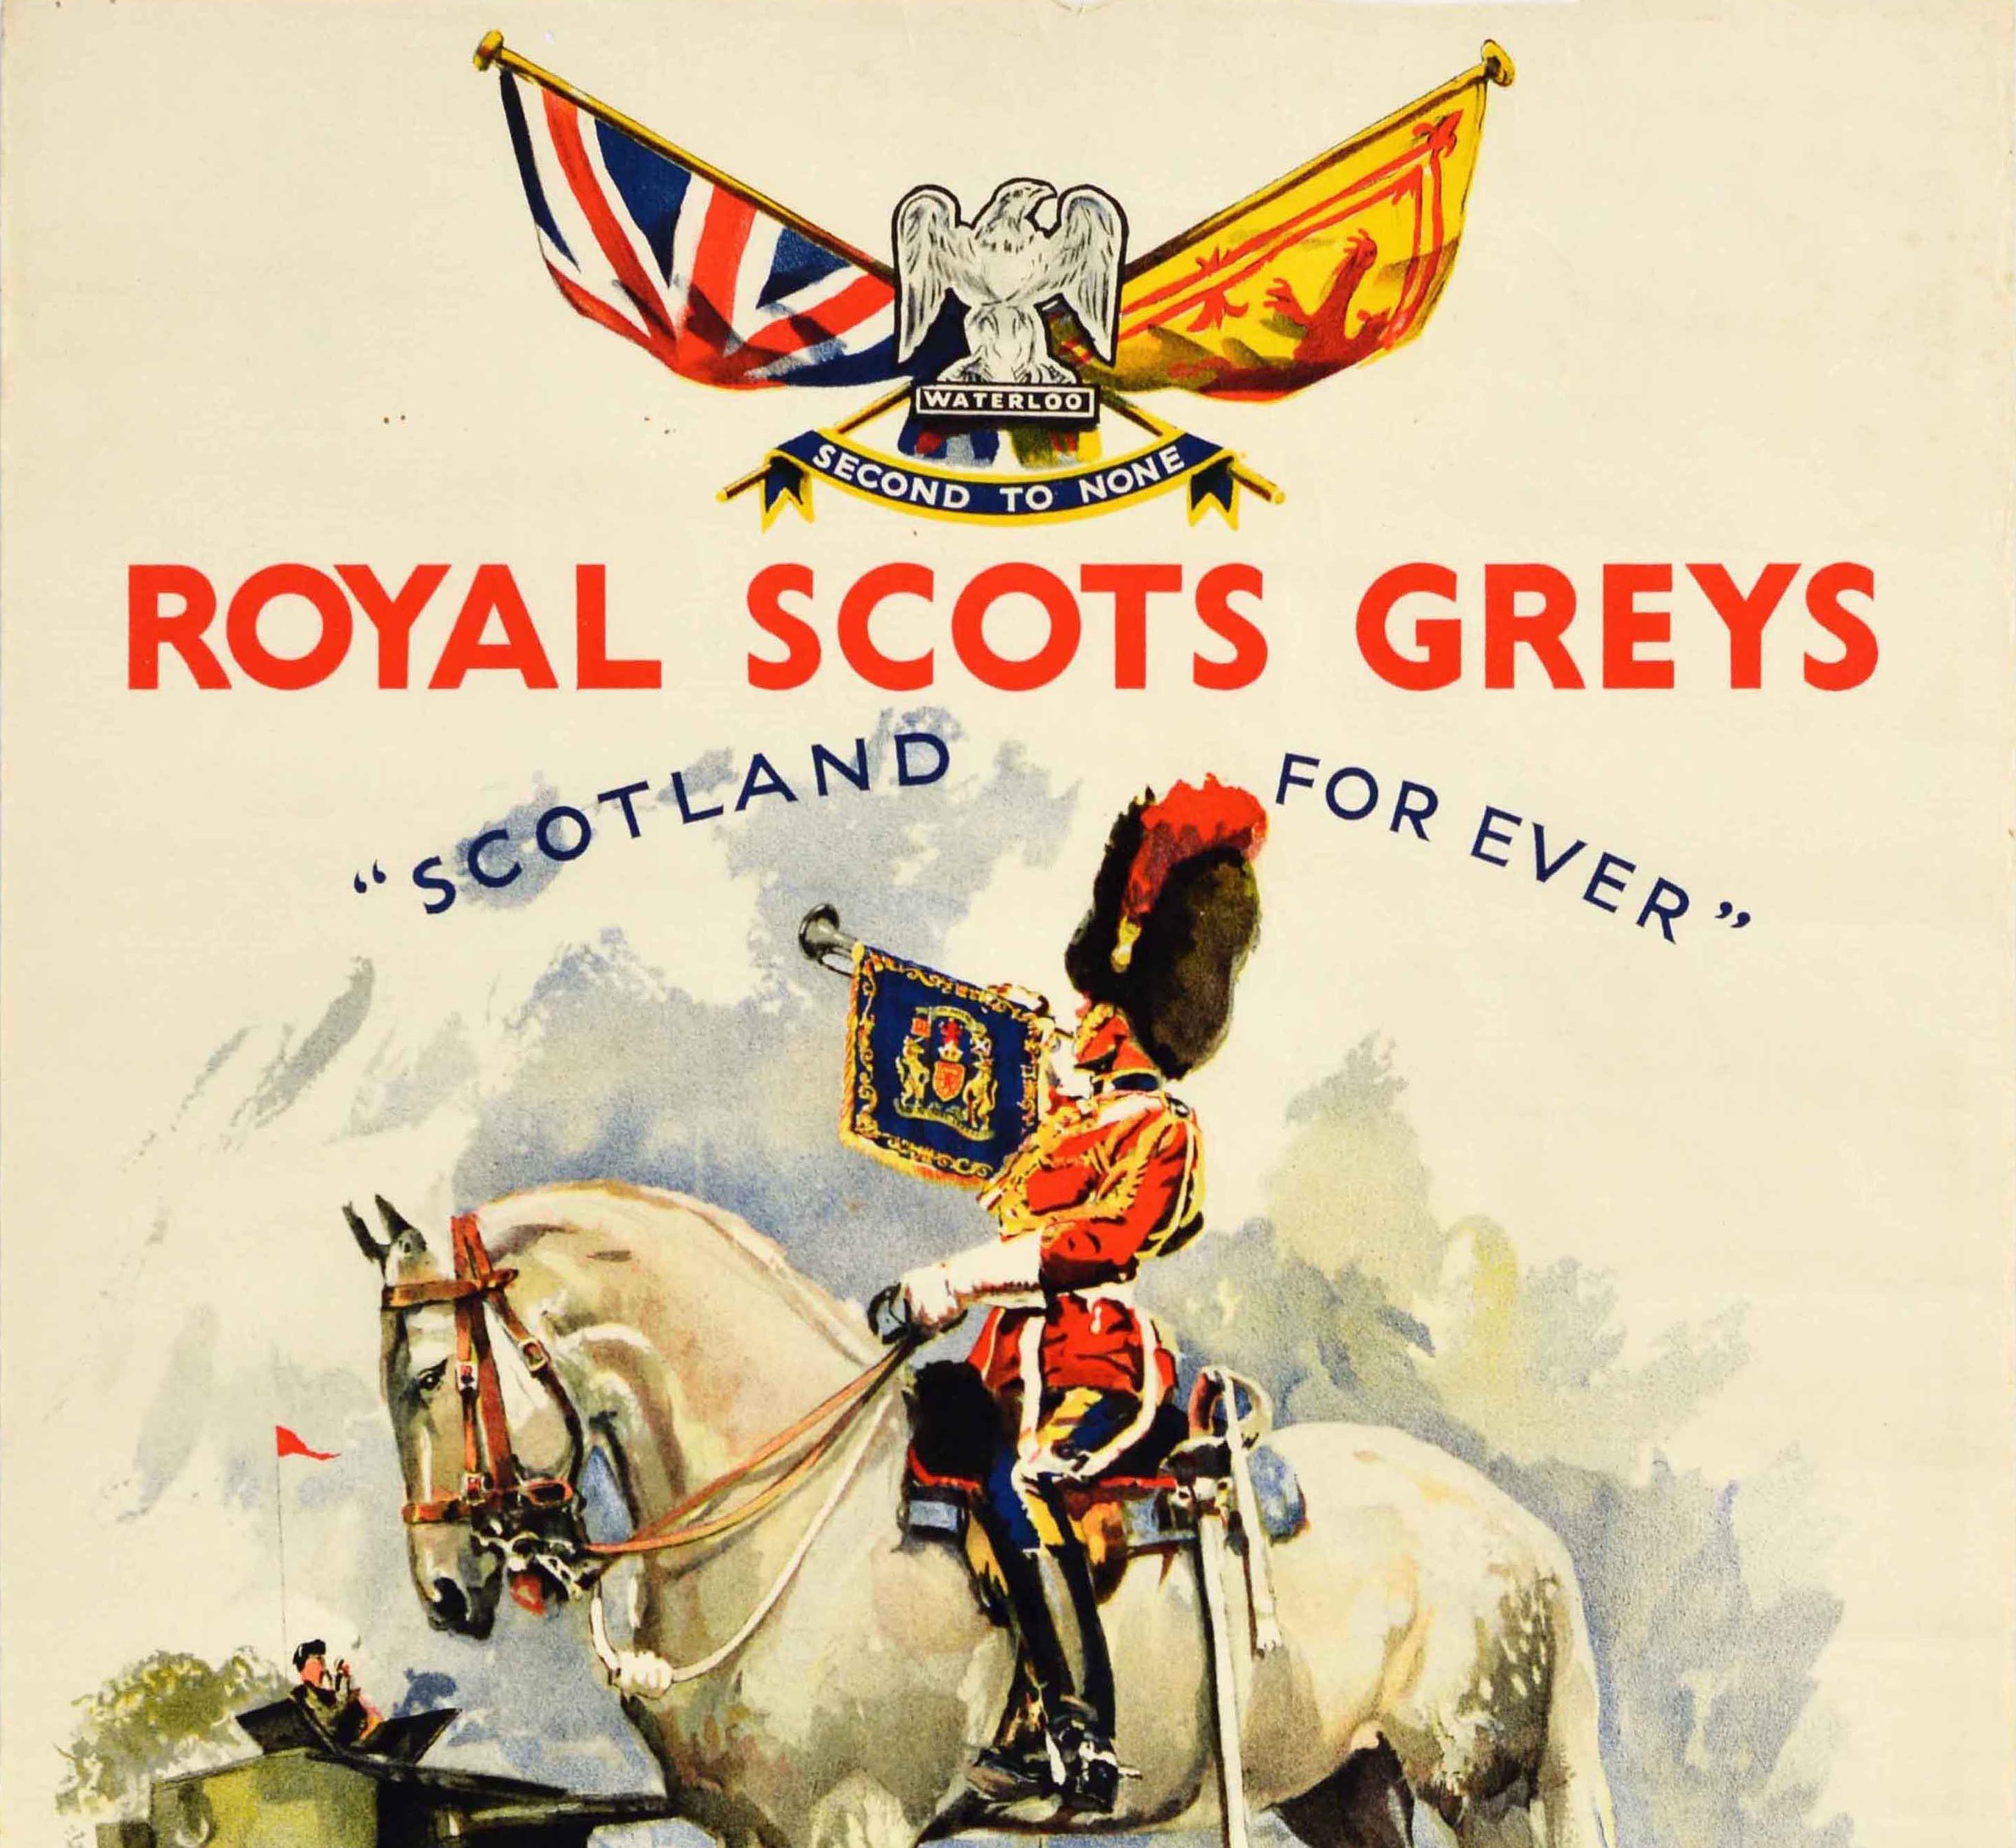 Original vintage army recruitment poster featuring artwork by the Scottish commercial artist Tom Curr (1887-1958) depicting a man in military uniform on a horse in front of soldiers and tanks with flags on the regimental badge above reading Waterloo